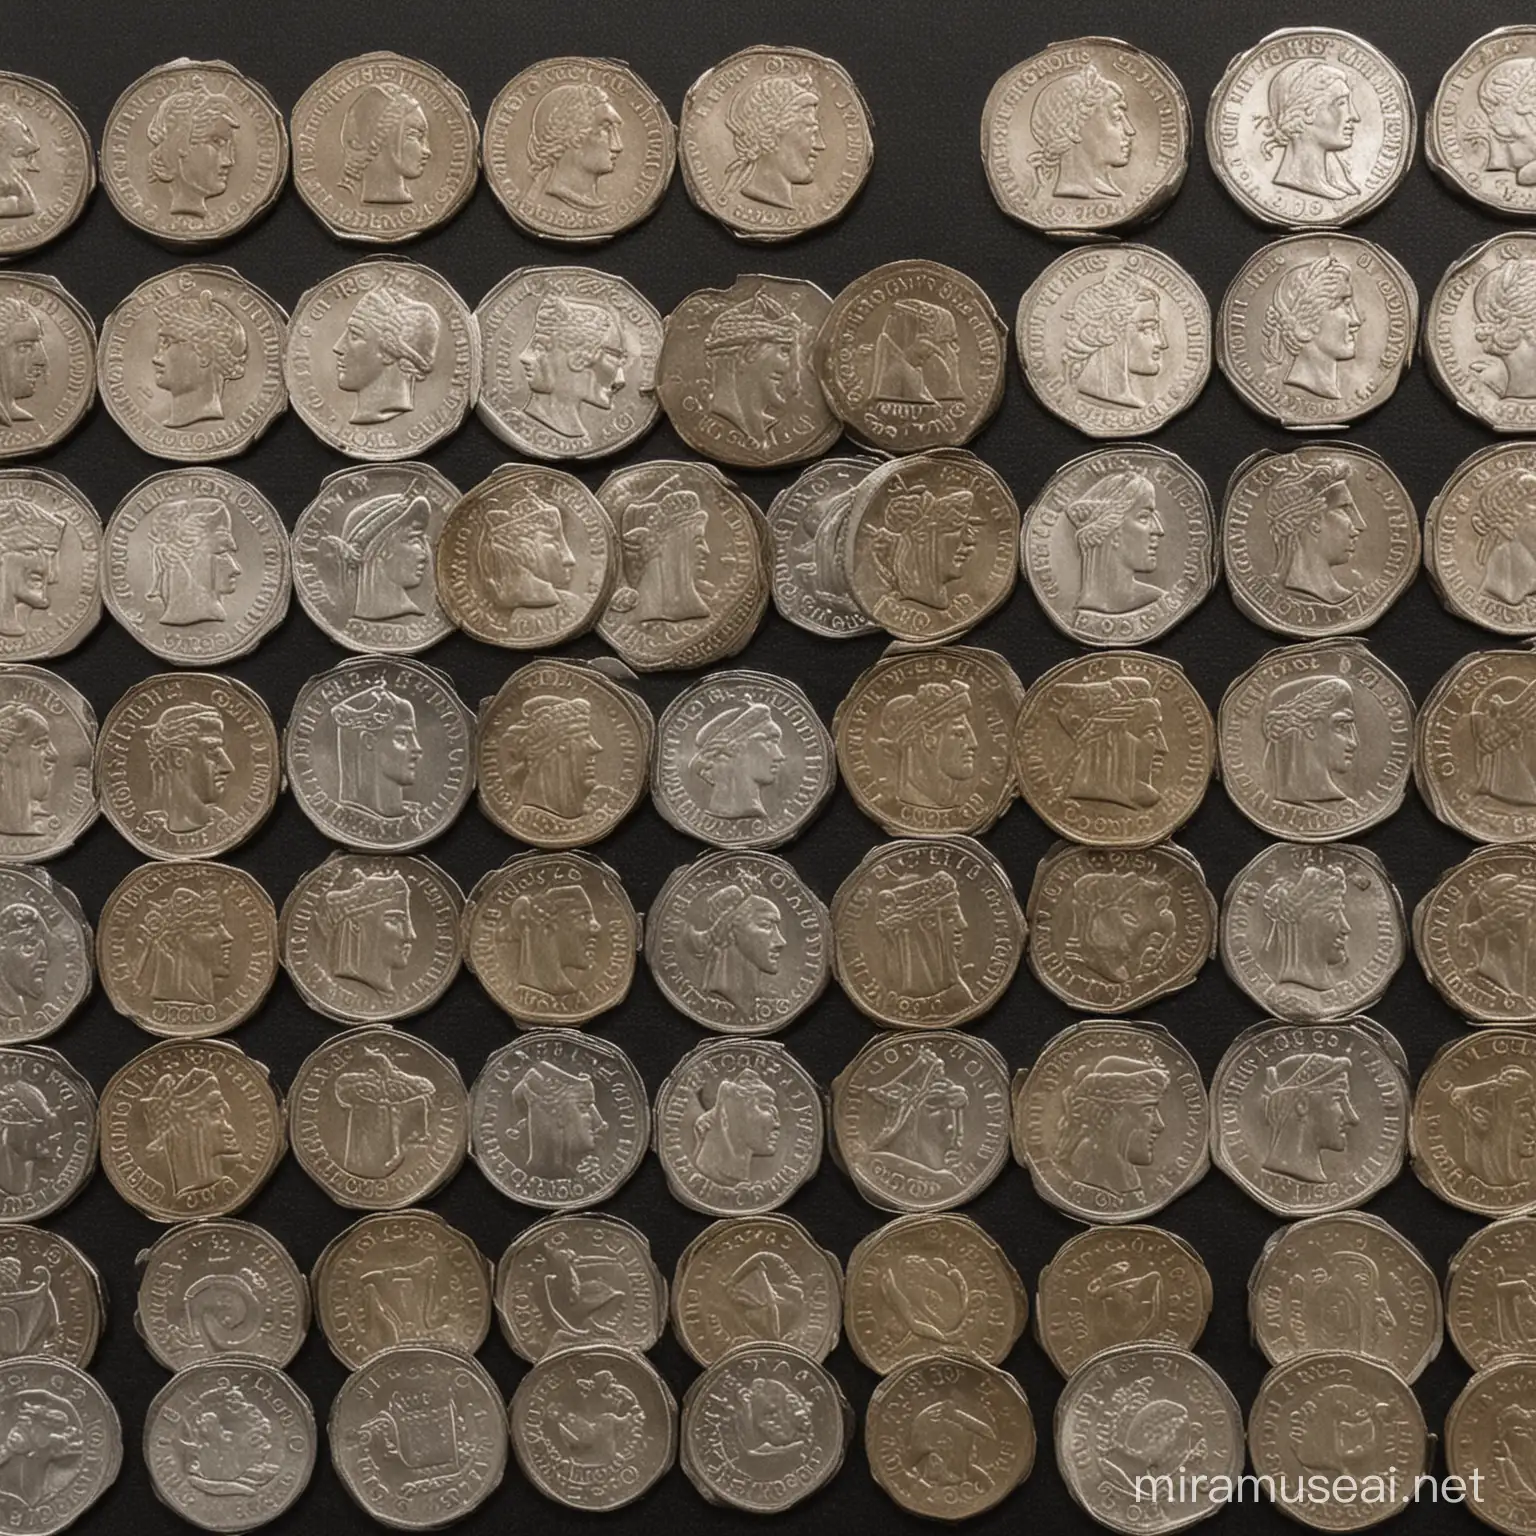 Assortment of Rare Coins Collection Display